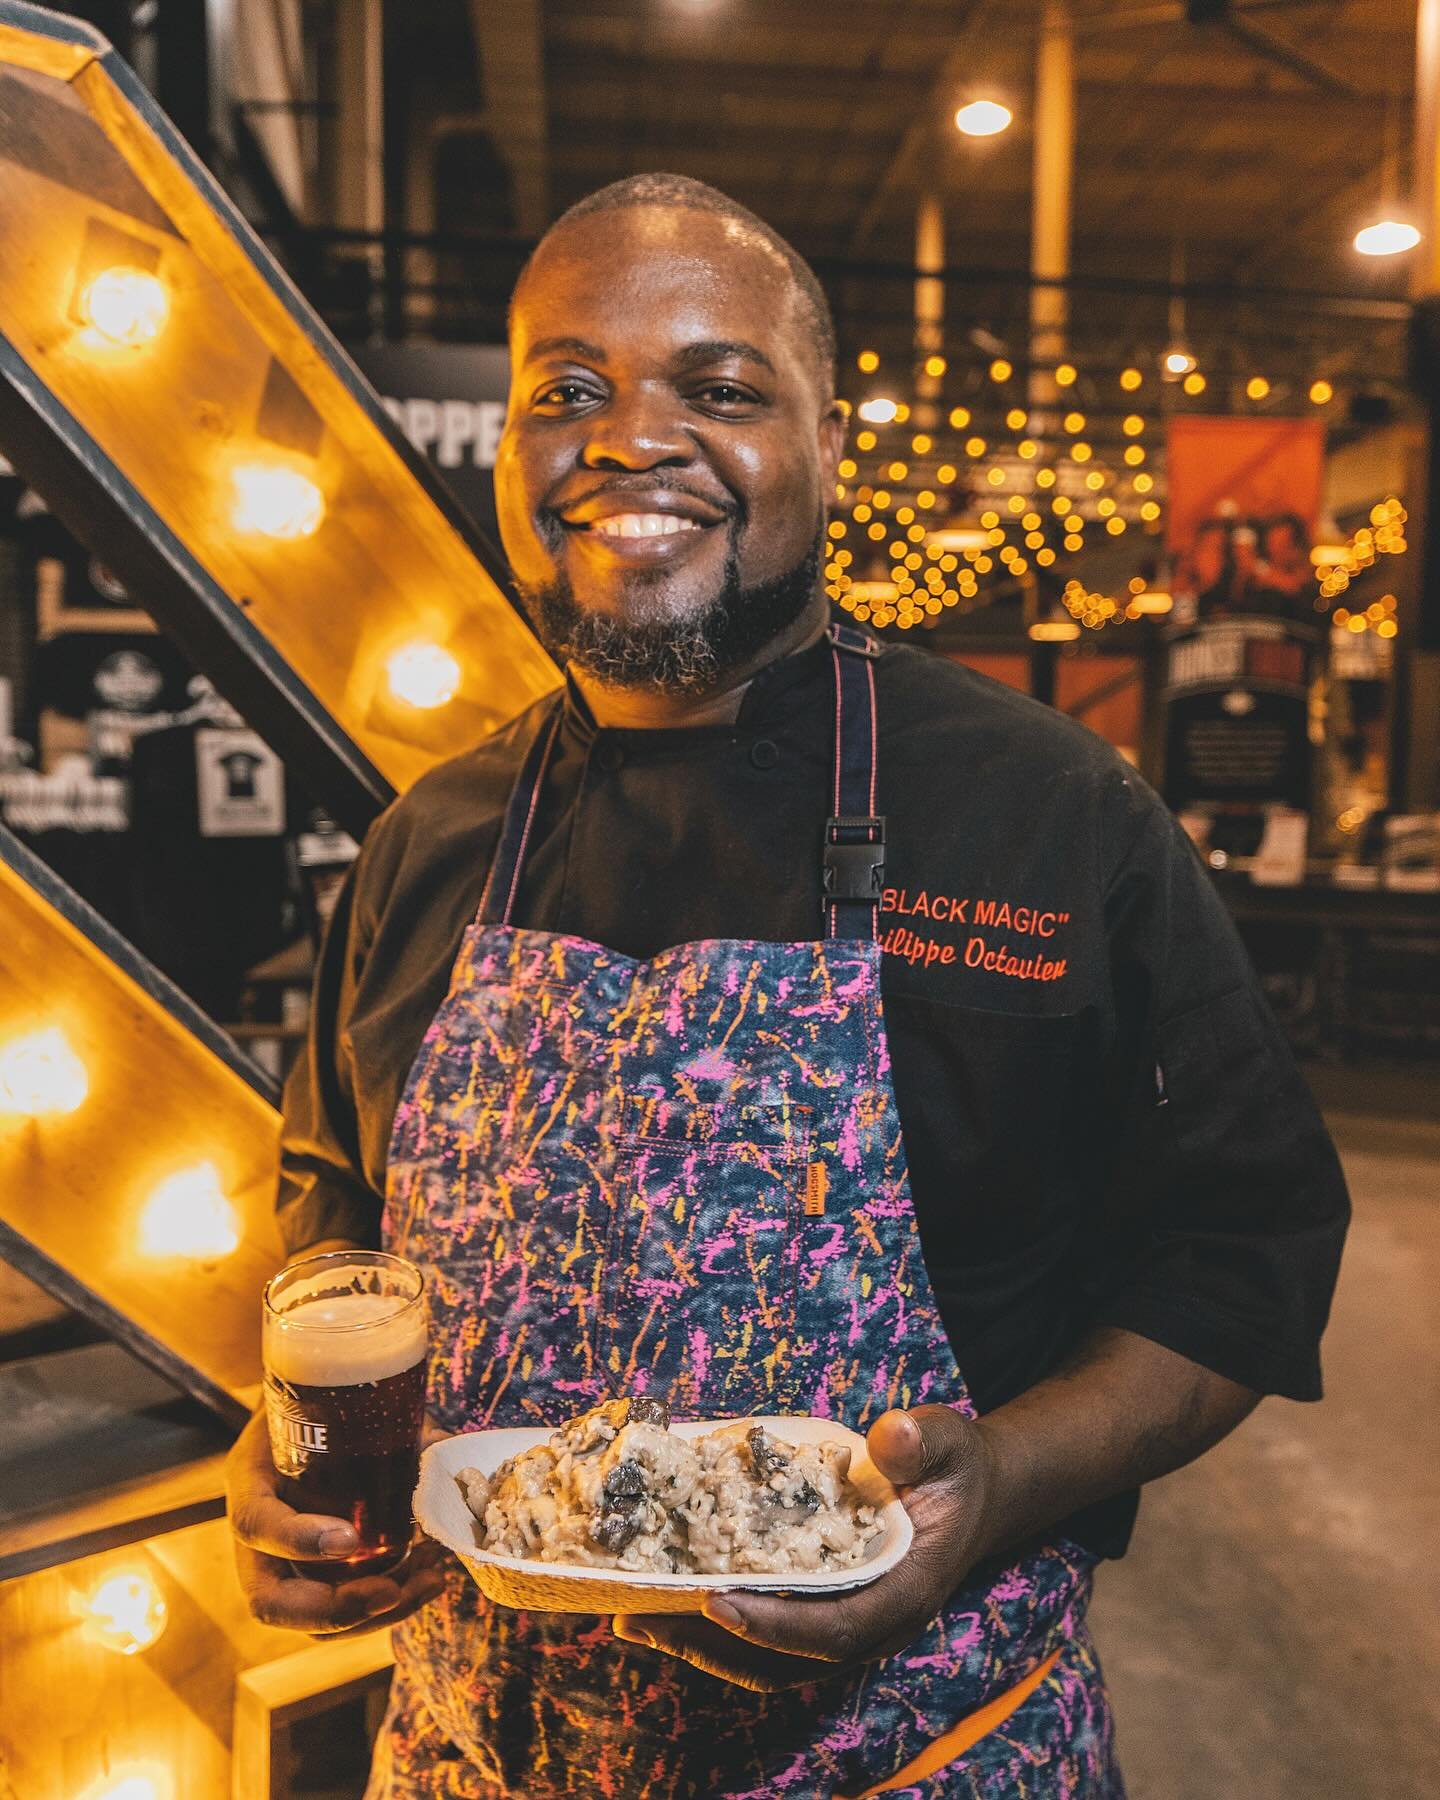 There&rsquo;s no better party (for your taste buds) than a Black Magic party!

We&rsquo;re excited to announce that @blackmagicculinarycreations will be back at the brewery on Saturday, April 20th from 5-9PM bringing the HEAT! 🔥

Head over to the EV